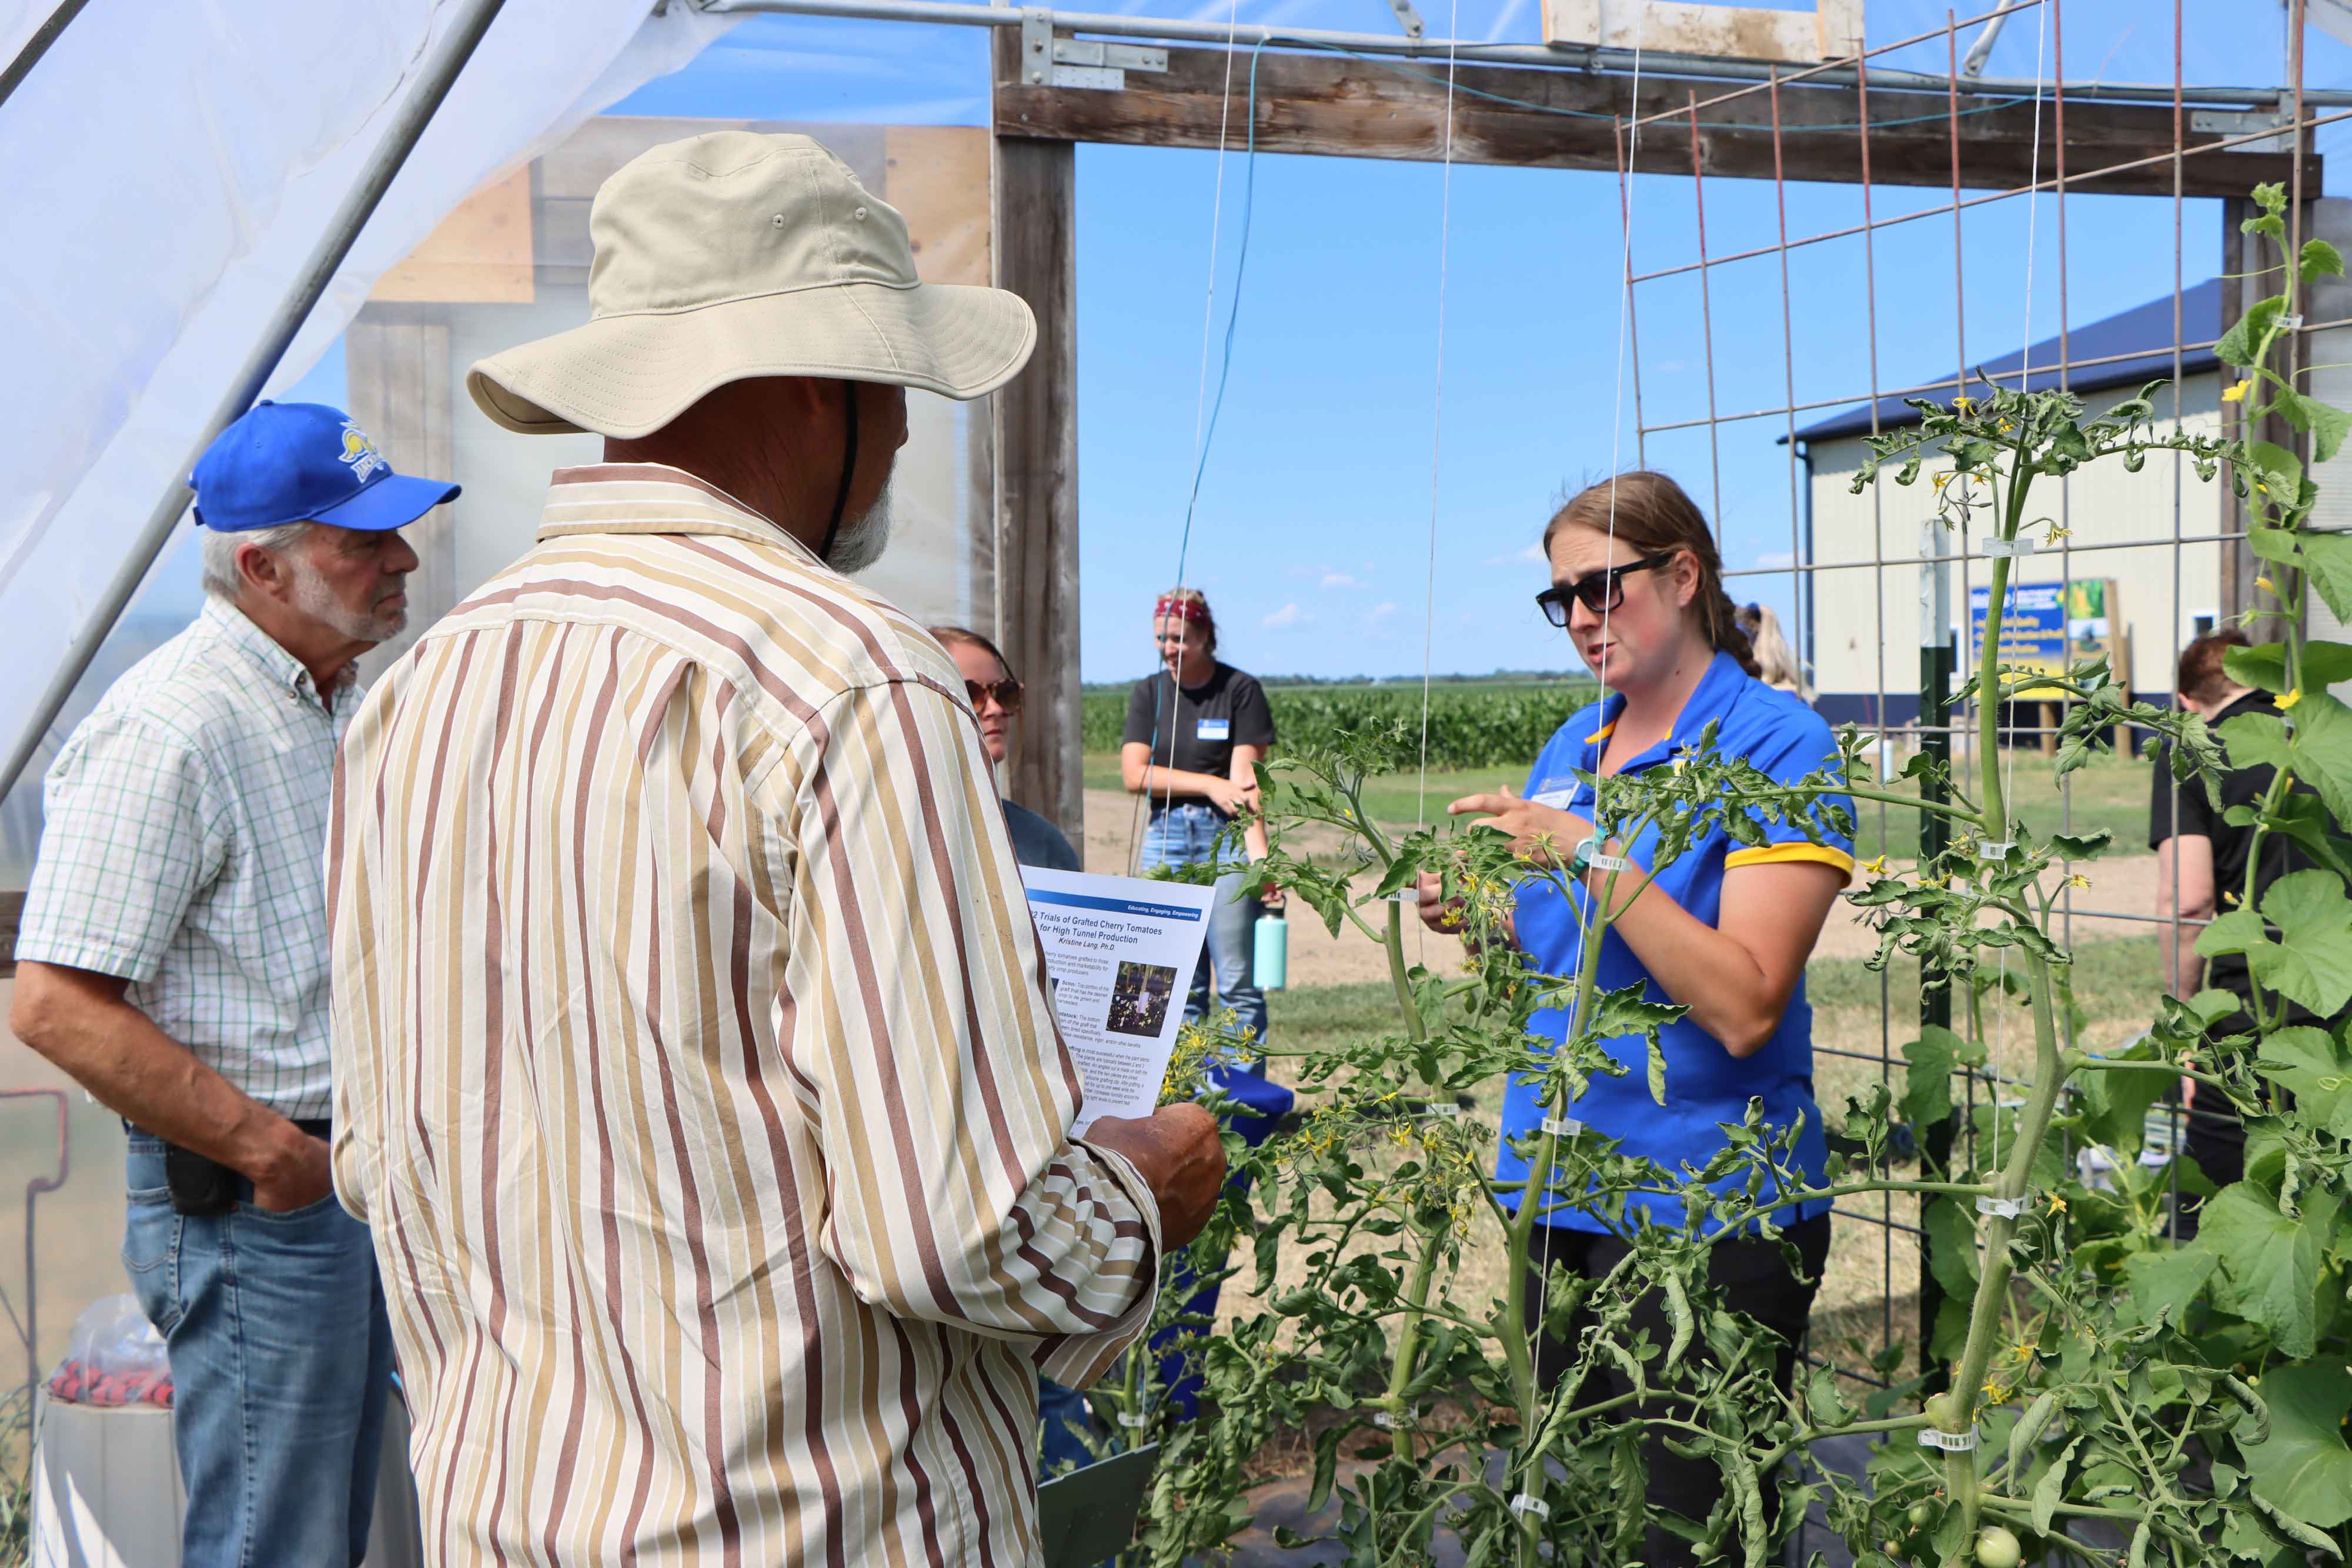 An Extension specialist speaks to two attendees at the 2022 Research Farm Field Day